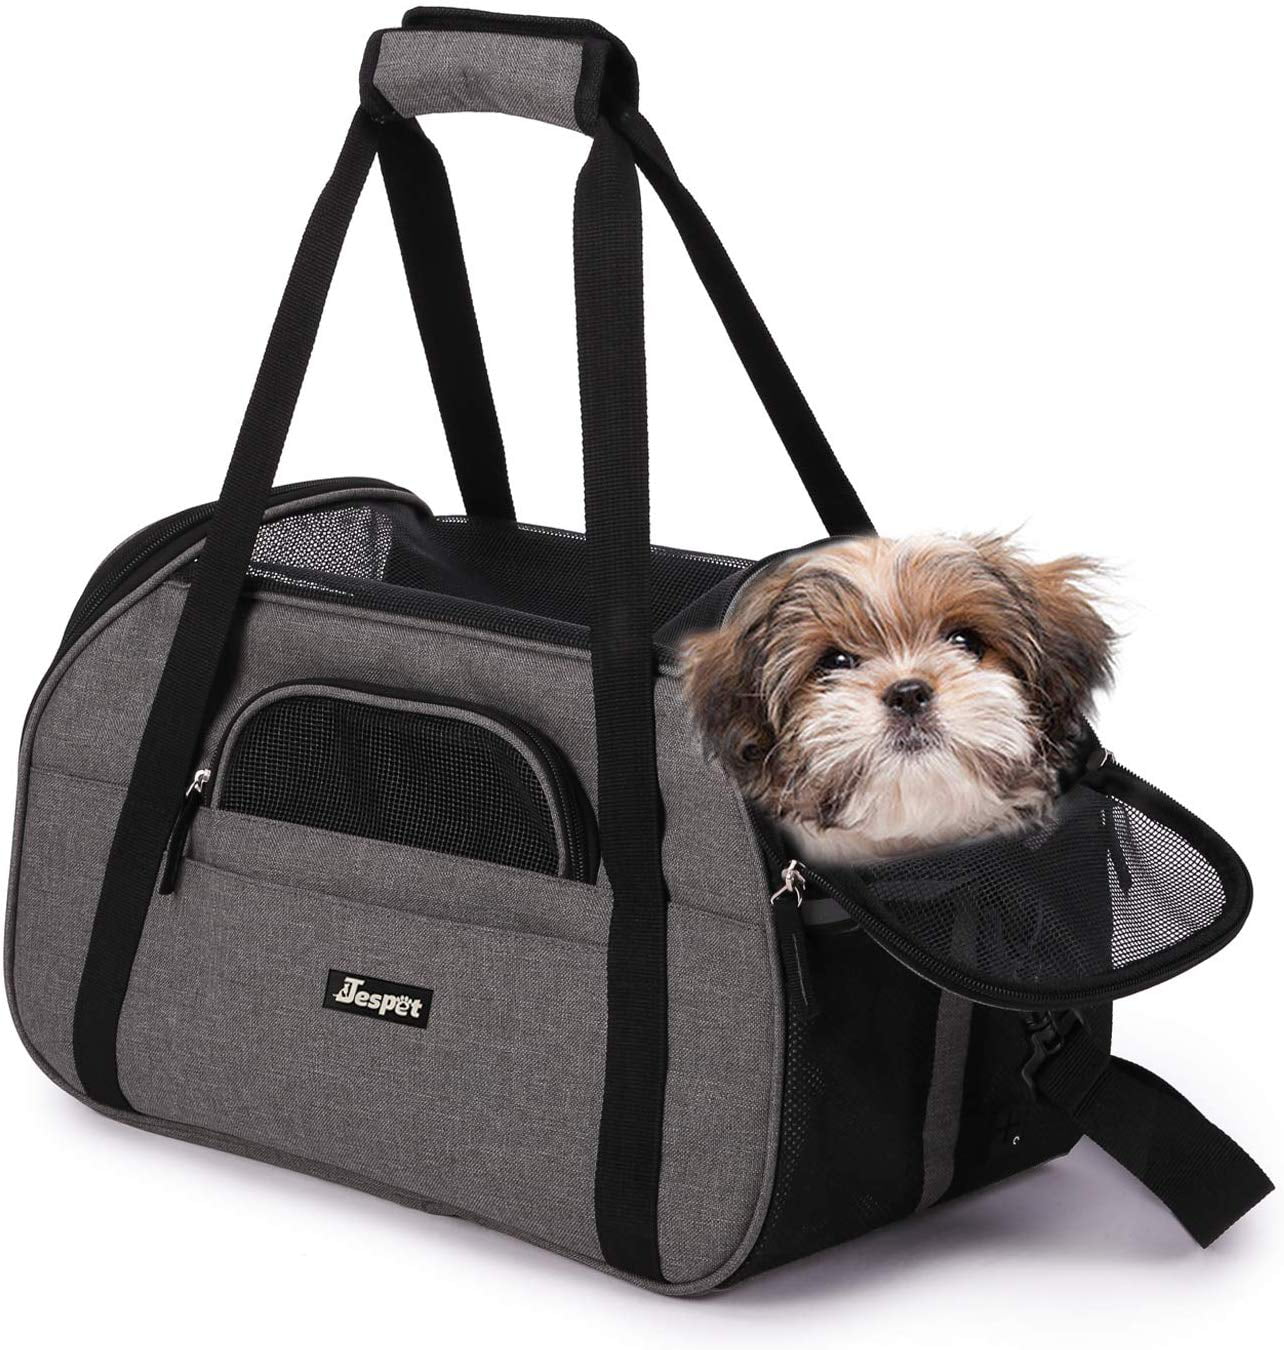 Soft-Sided Kennel for Cats Water Resistant Pet Magasin Airline Approved Cat Carrier Collapsible Puppies and Small Animal Small Dogs 